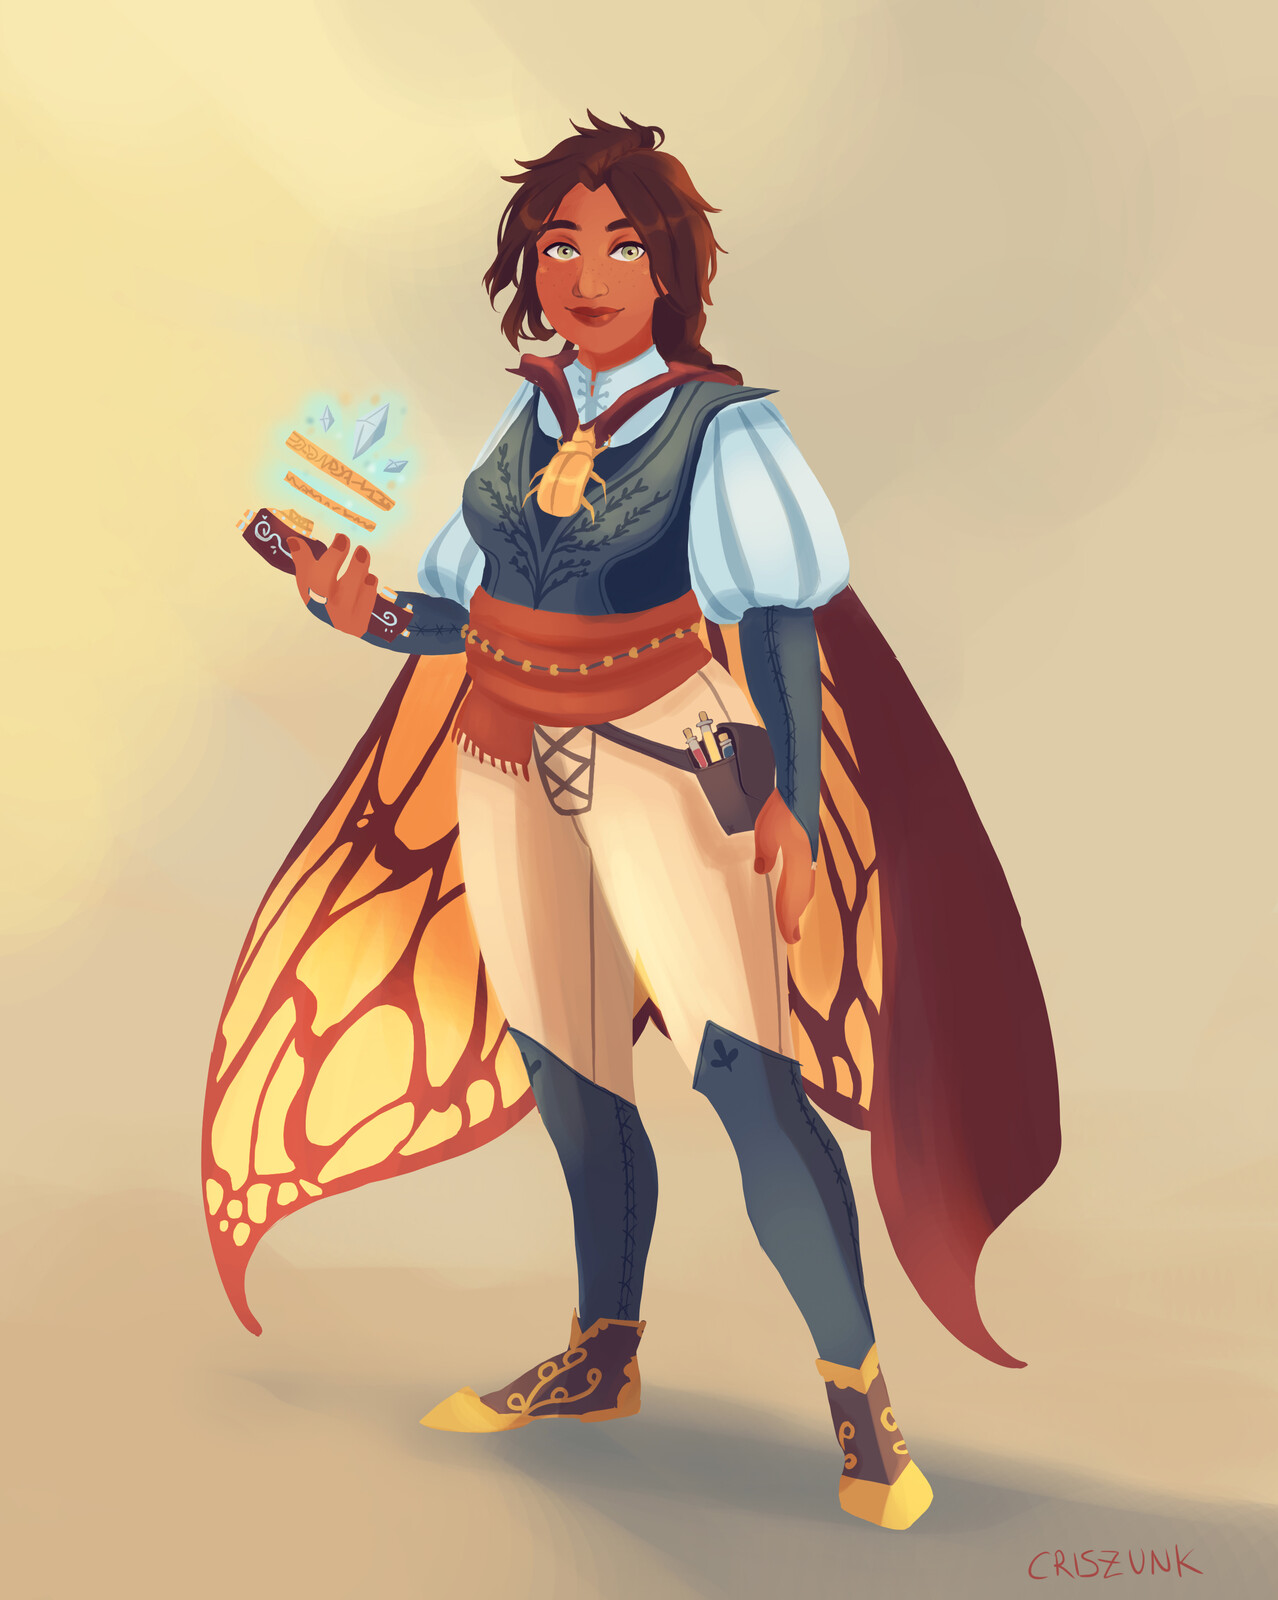 Character design of a magic apprentice in the fae world of Dungeons and Dragons